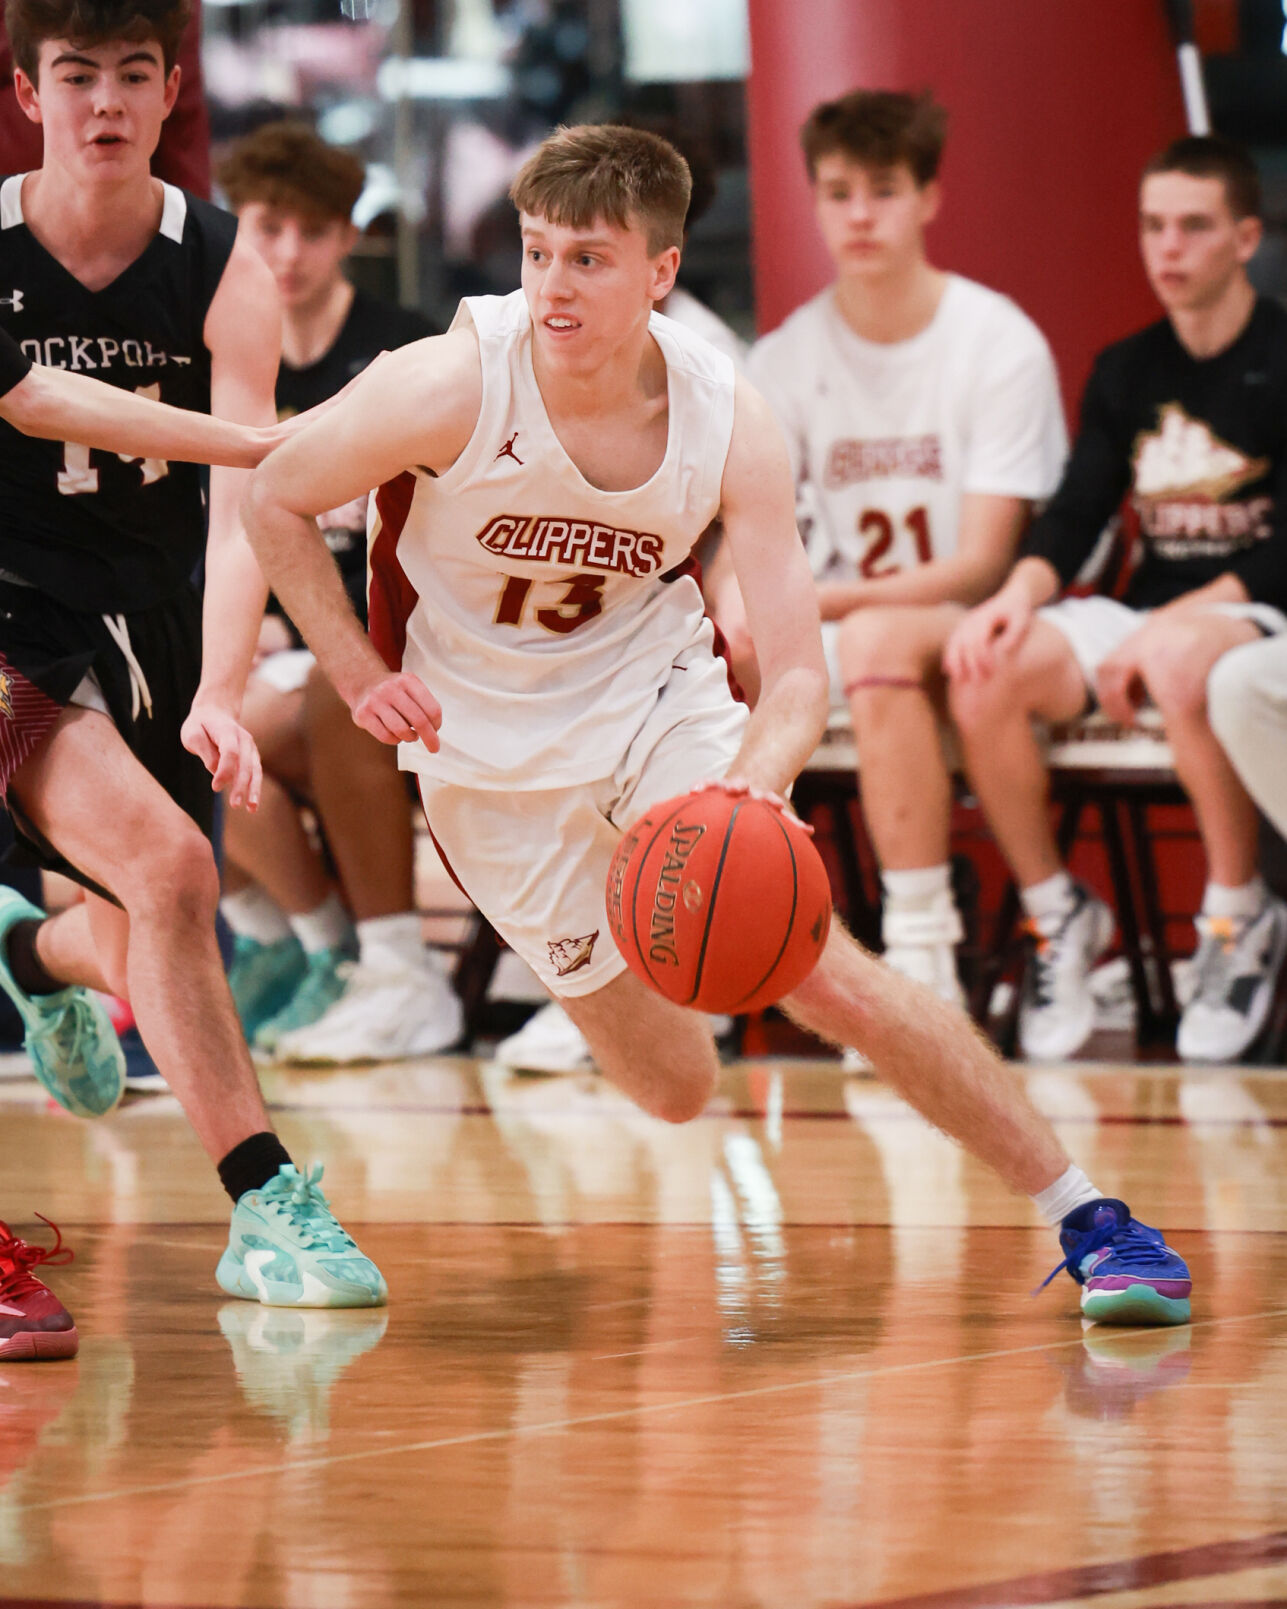 Newburyport Boys Basketball Clinches Victory Over Hudson in Division 3 Opener